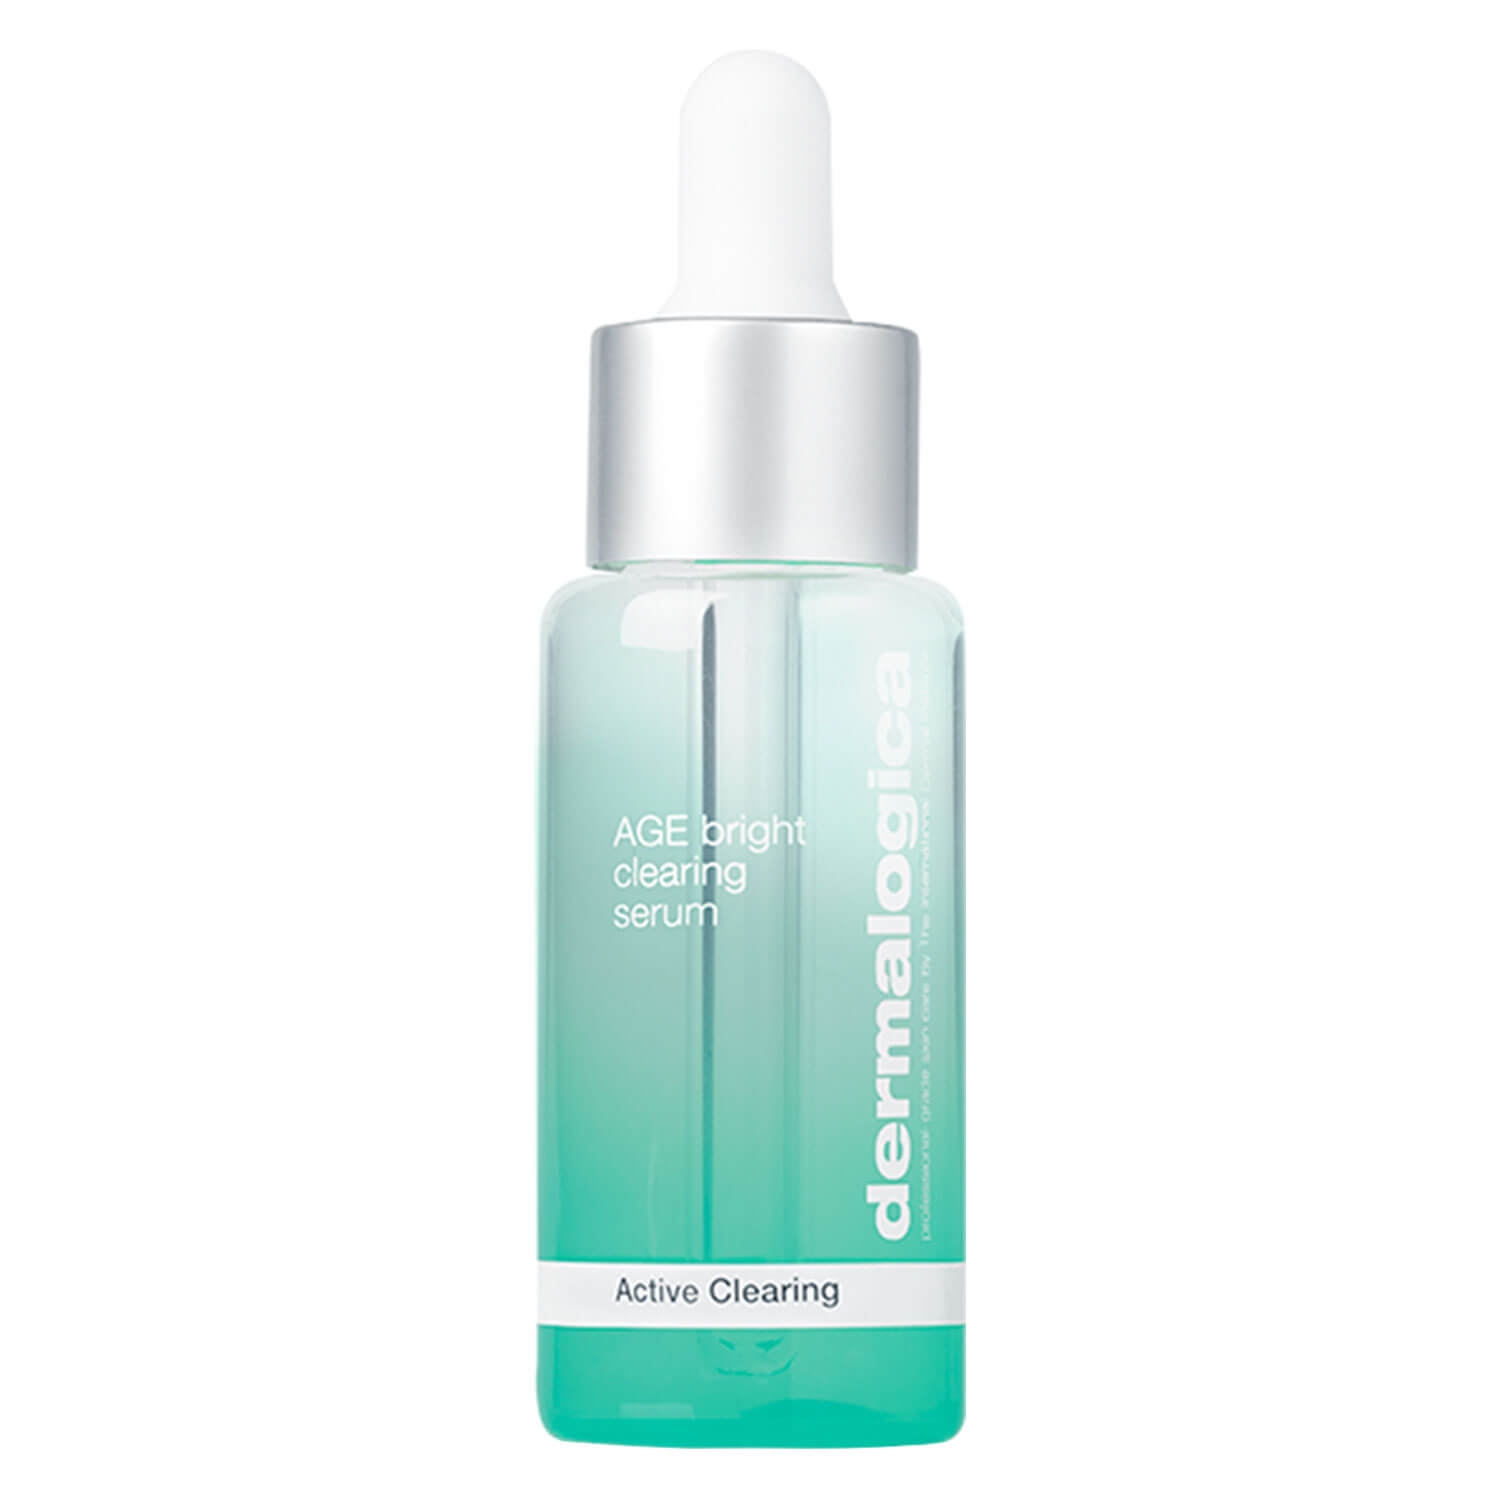 Product image from Active Clearing - AGE Bright Clearing Serum